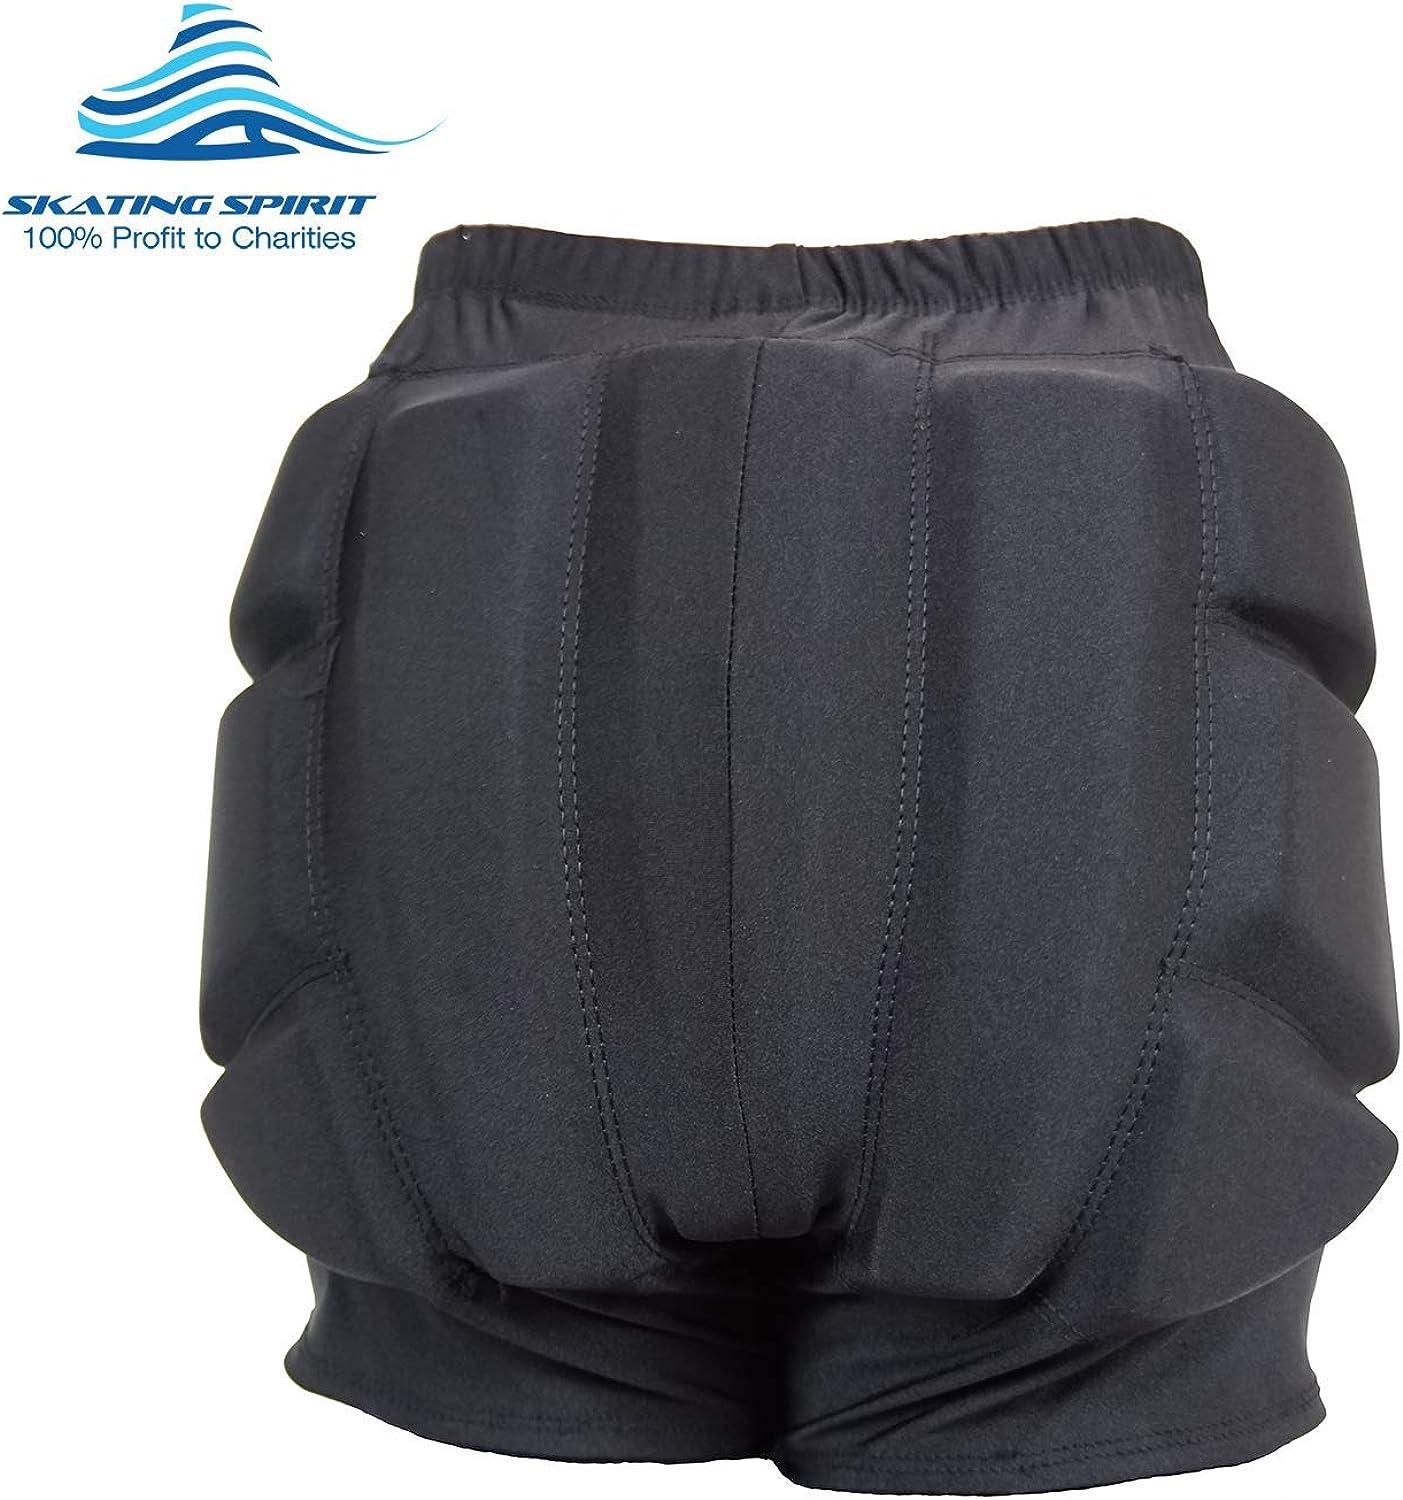 Tailbone Protector and Butt Pad by Booty Guard